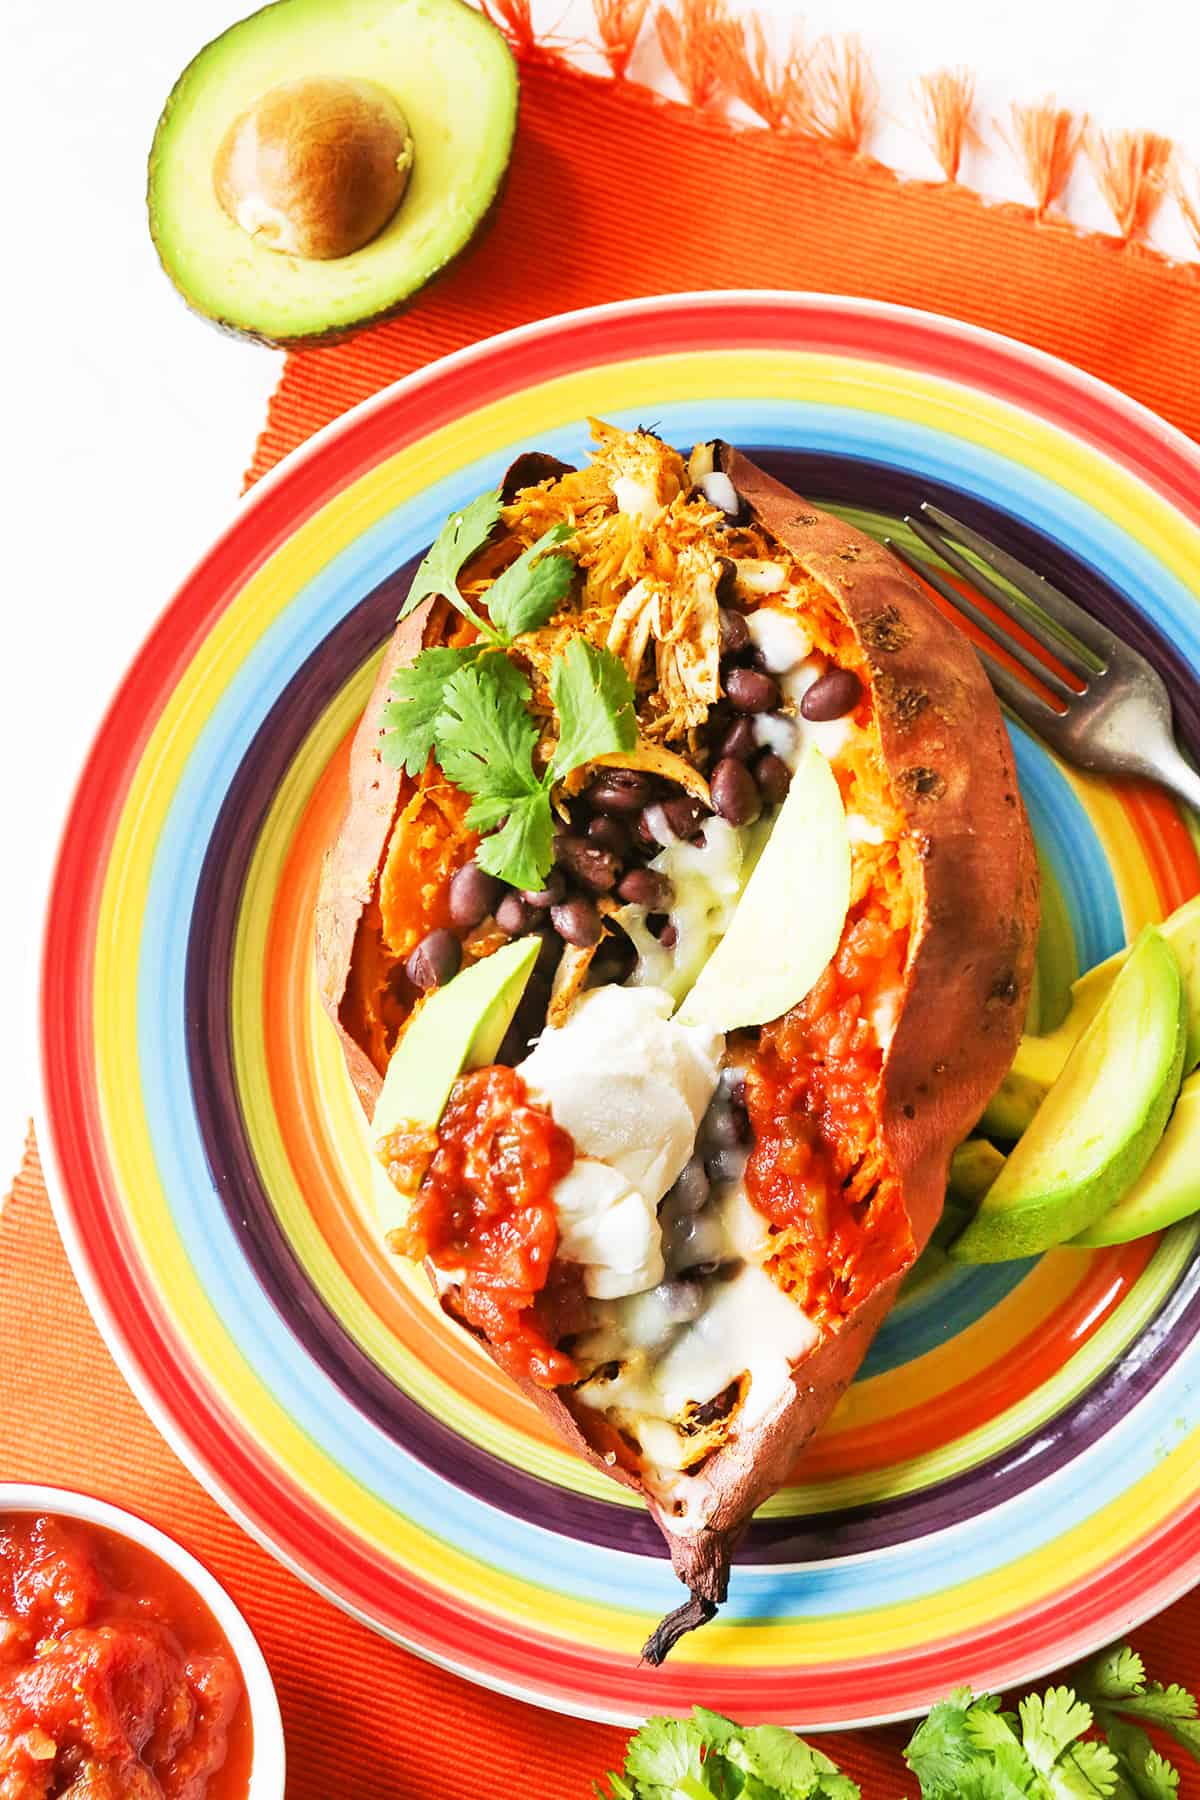 Top view of a stuffed sweet potato, loaded with mexican ingredients.